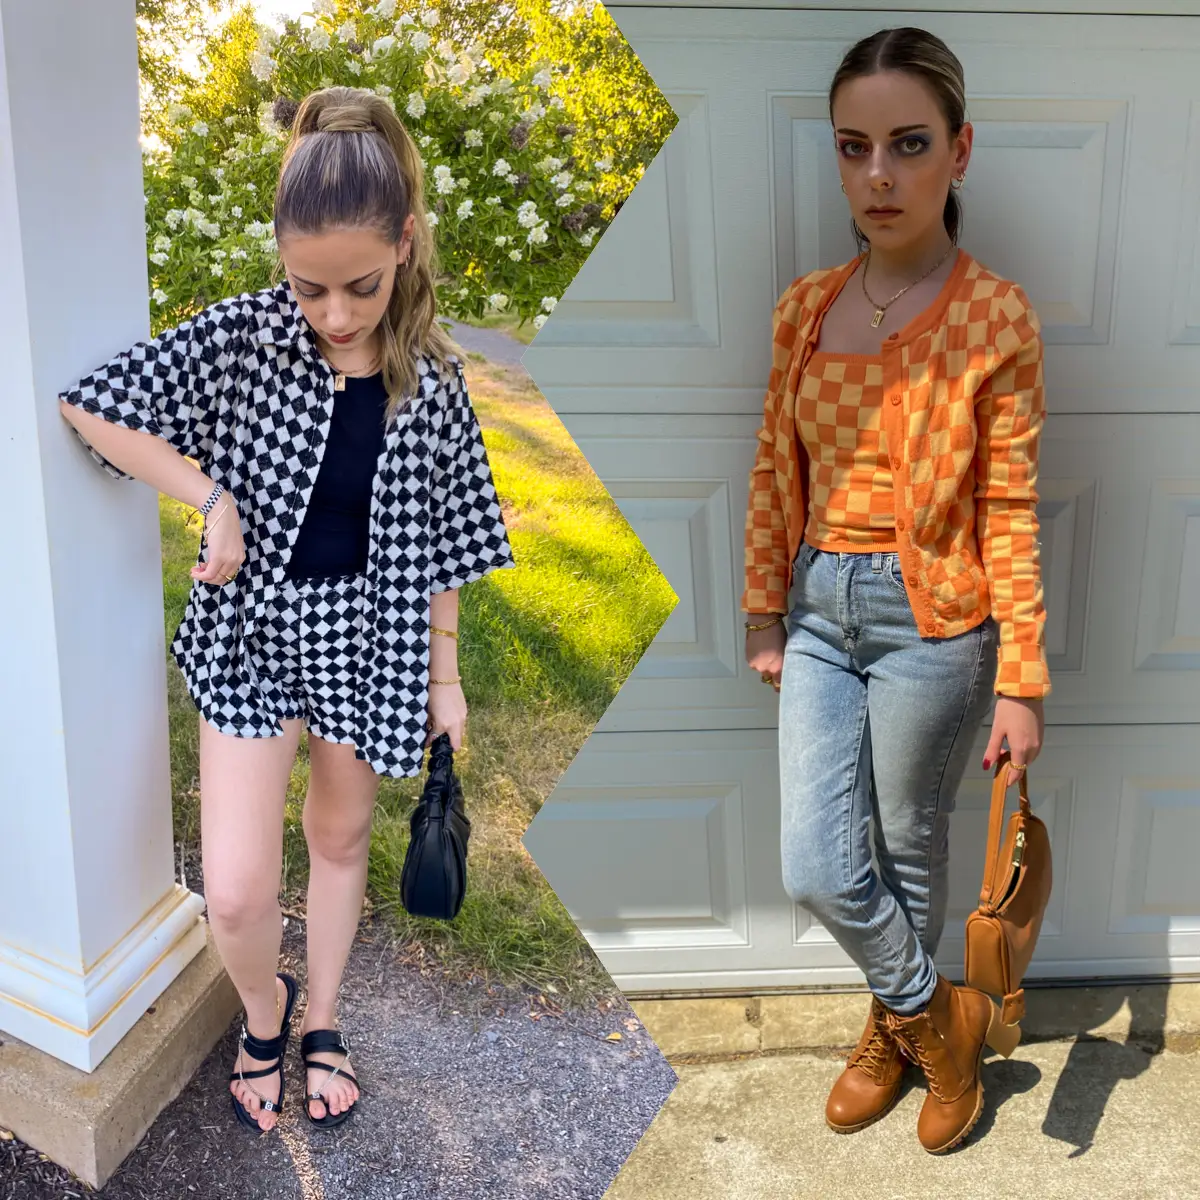 checker outfits